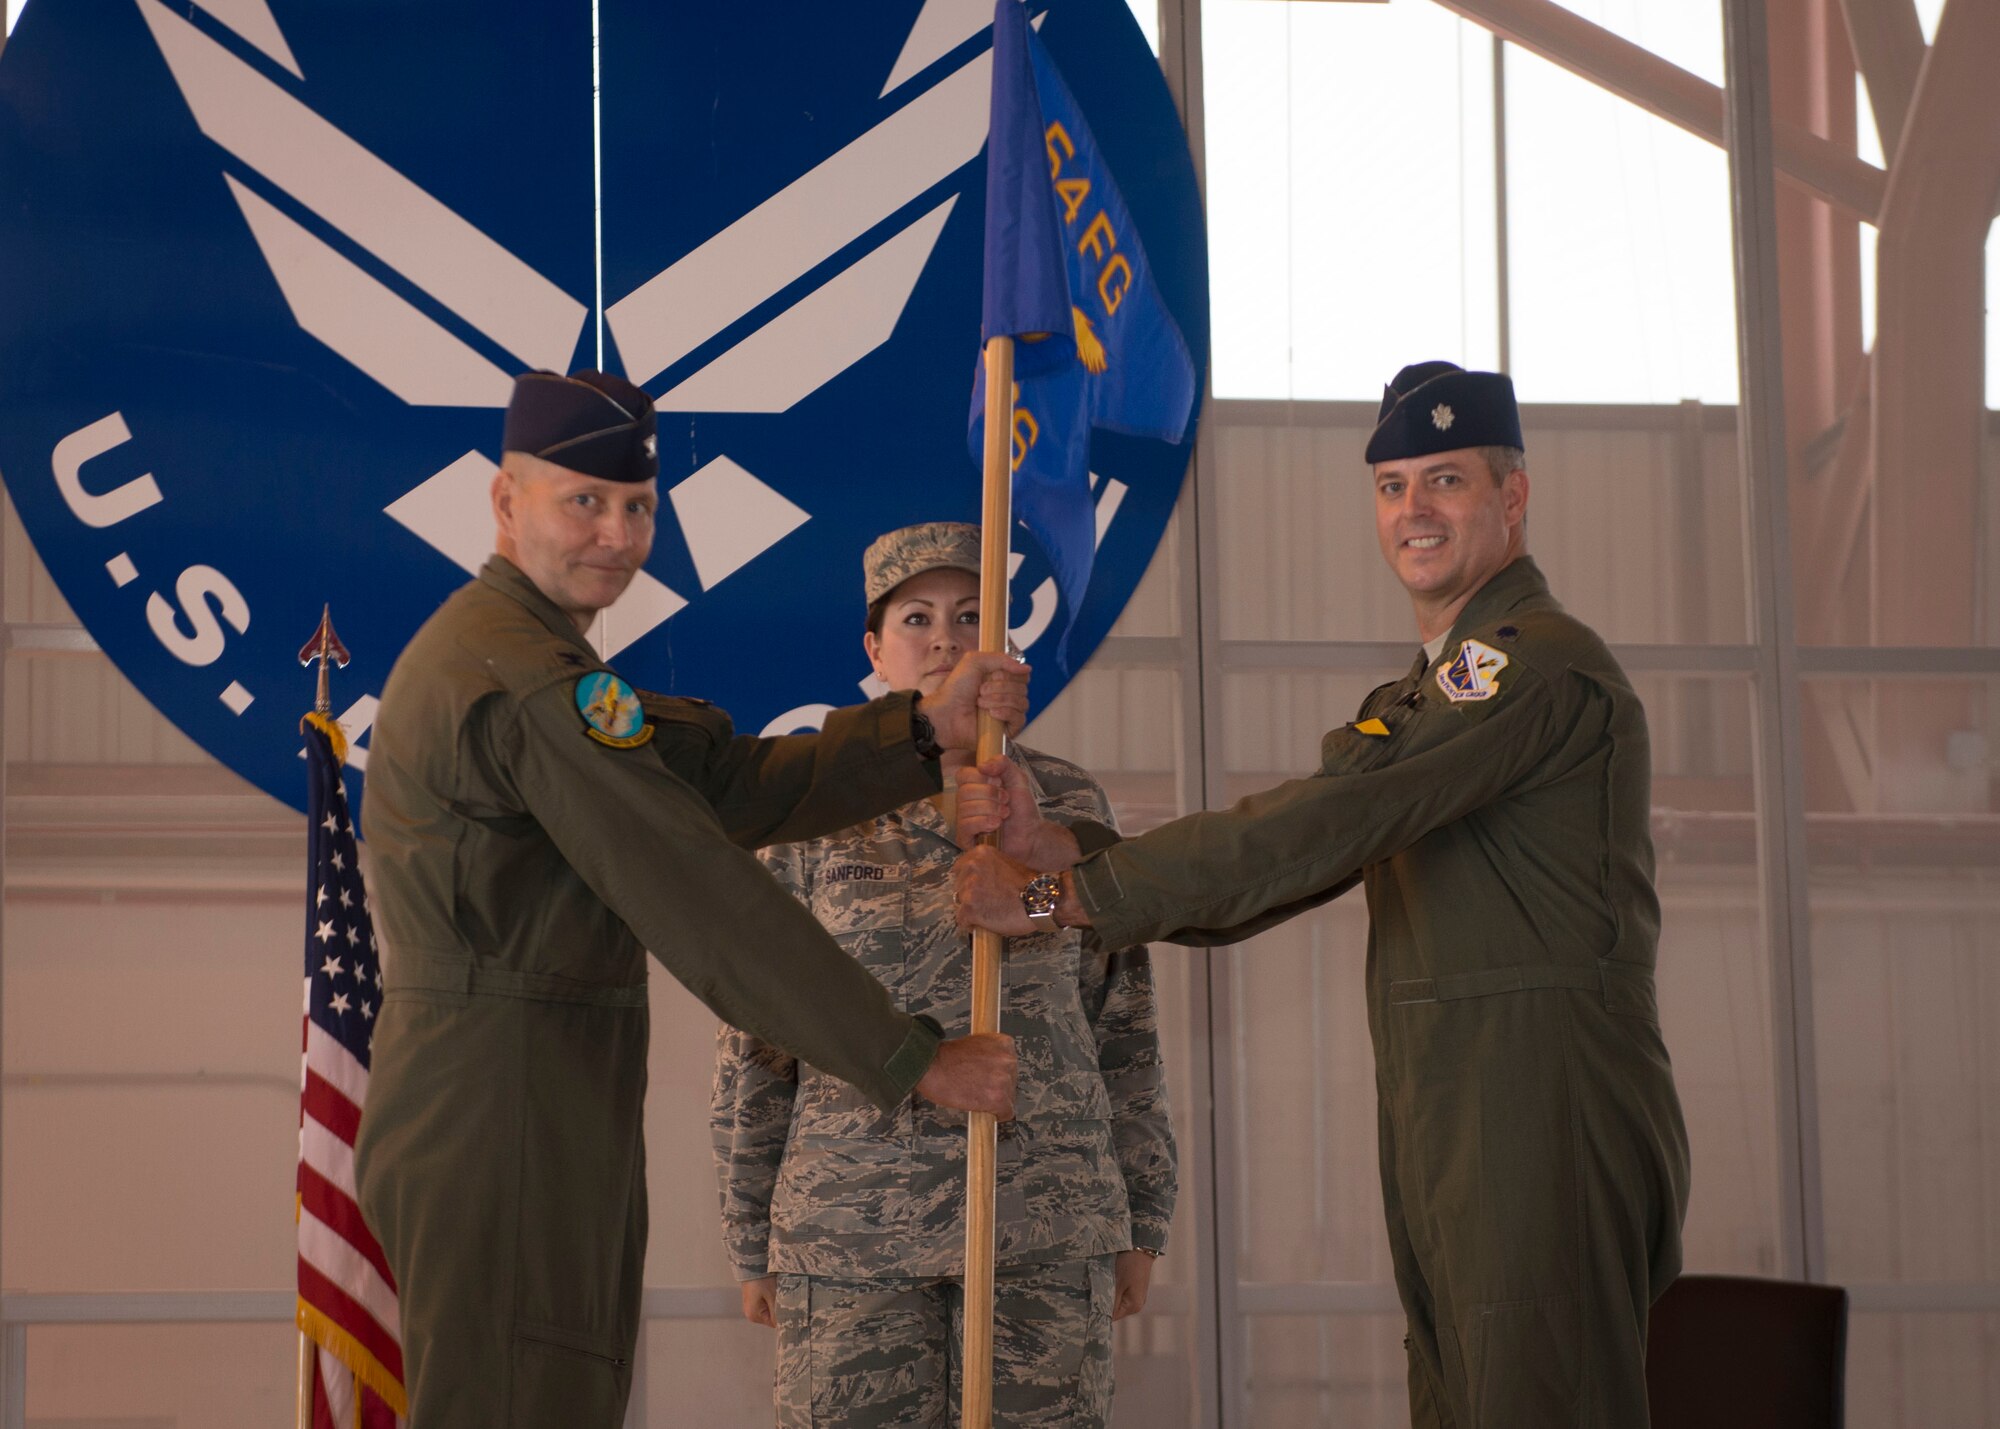 Lt. Col. Andrew Caggiano, 314th Fighter Squadron commander, accepts the 314th FS guidon from Col. Jeffrey Jenssen, 54th Fighter Group commander as part of the 314th FS activation ceremony at Holloman Air Force Base, N.M., on July 14. Caggiano graduated with military distinction from the United States Air Force Academy in 1997. He earned his pilot wings at Euro-NATO Joint Jet pilot Training in 1999 at Sheppard Air Force Base, Texas. He is a command pilot with over 1,850 hours in the F-16 Fighting Falcon. The mission of the 314th FS is to produce the world’s greatest F-16 Fighting Falcon pilots and deploy combat mission-ready Airmen to units worldwide. (U.S. Air Force photo by Senior Airman Aaron Montoya)